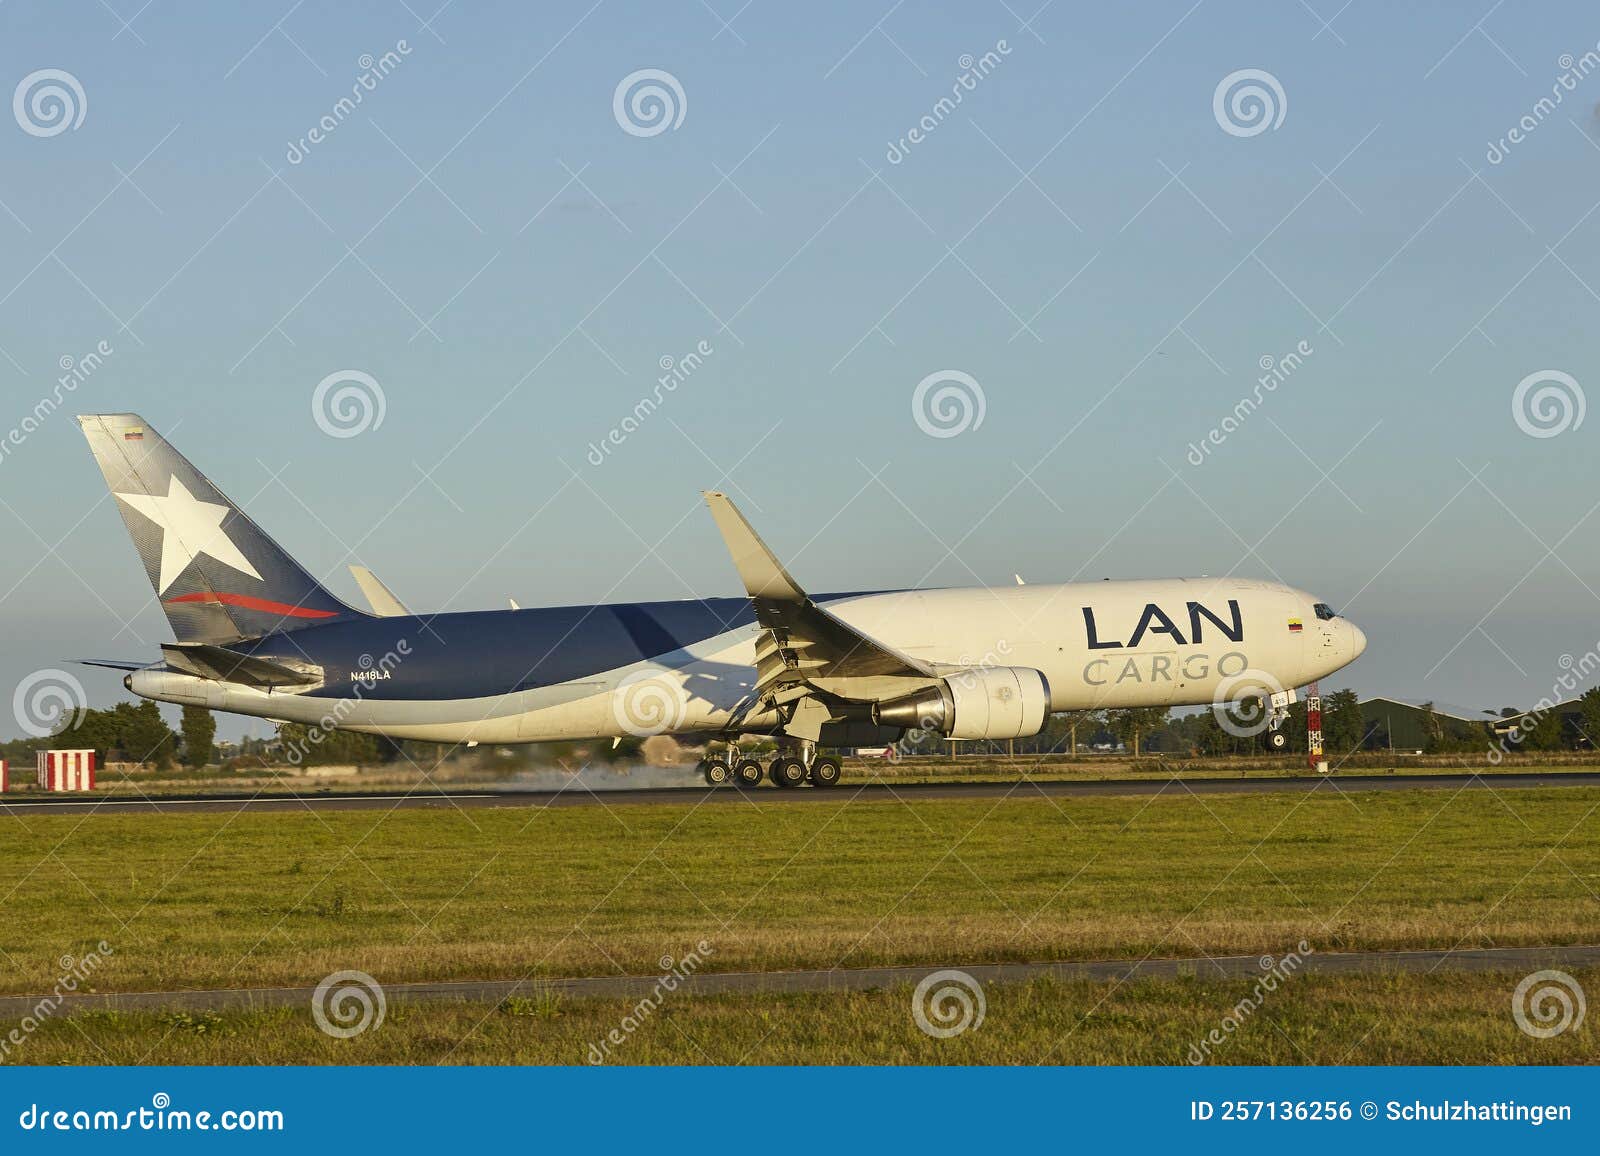 Amsterdam Airport Schiphol - Boeing 767-316FER of LATAM Cargo Colombia  Lands Editorial Photo - Image of amsterdam, view: 257136256